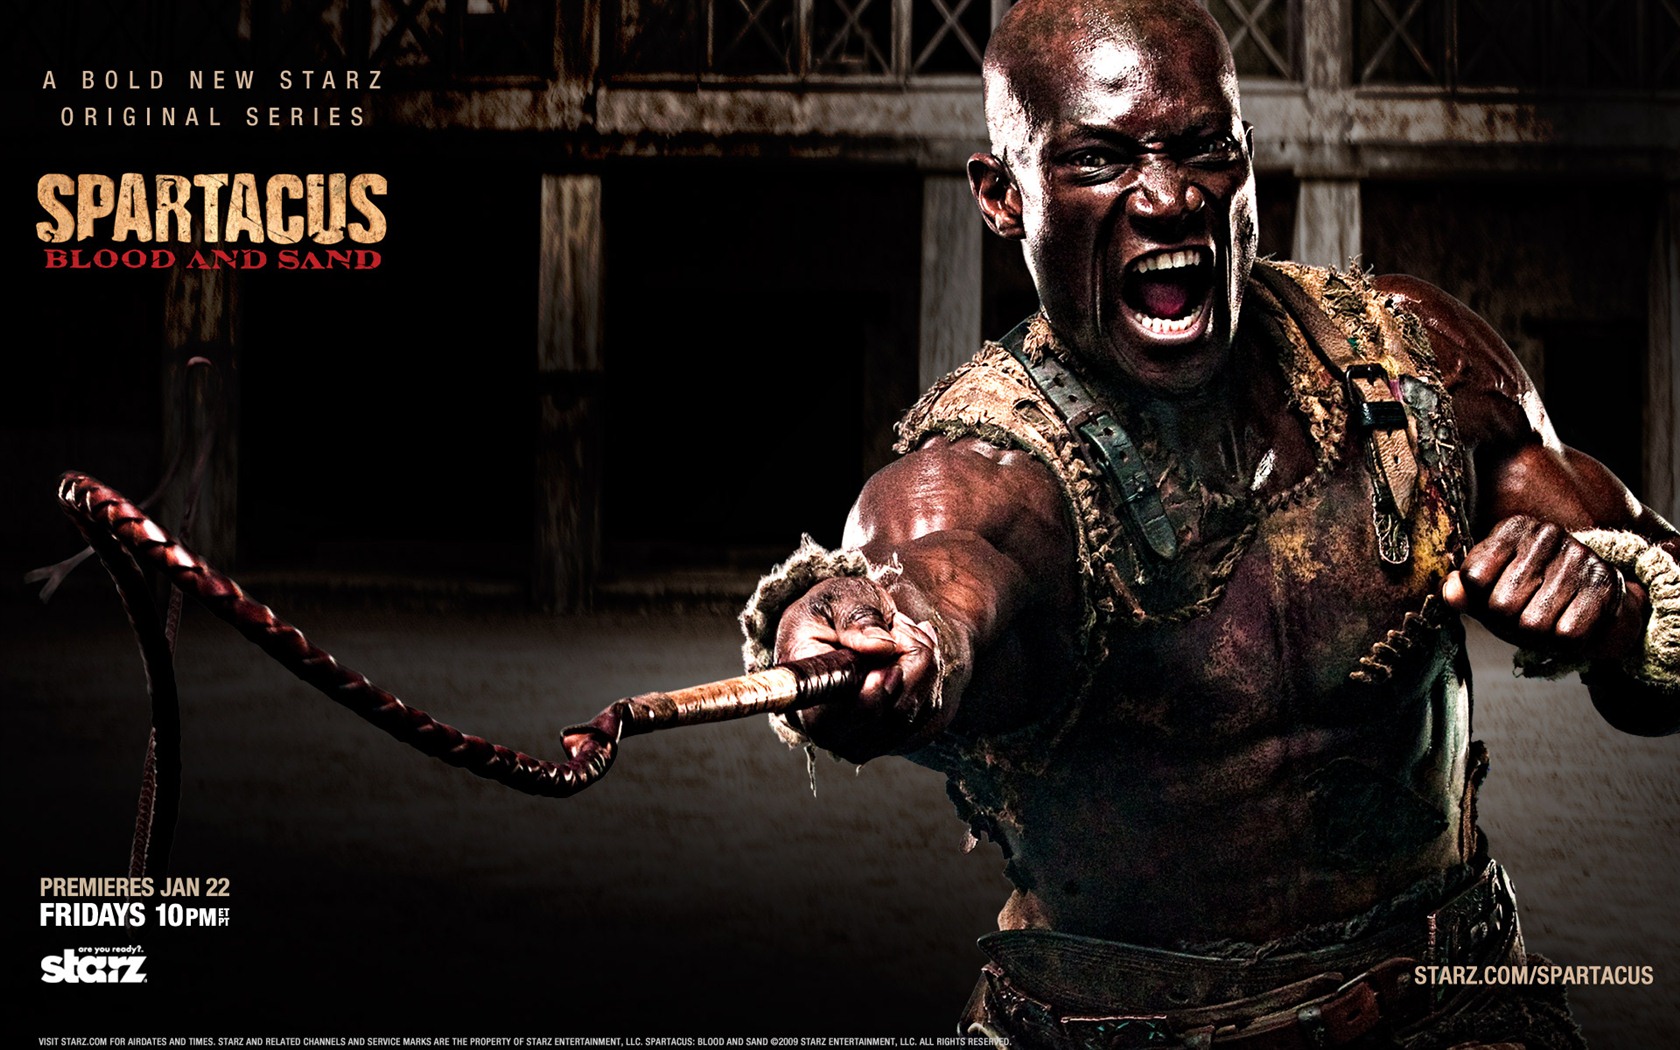 Spartacus: Blood and Sand HD Wallpaper #5 - 1680x1050